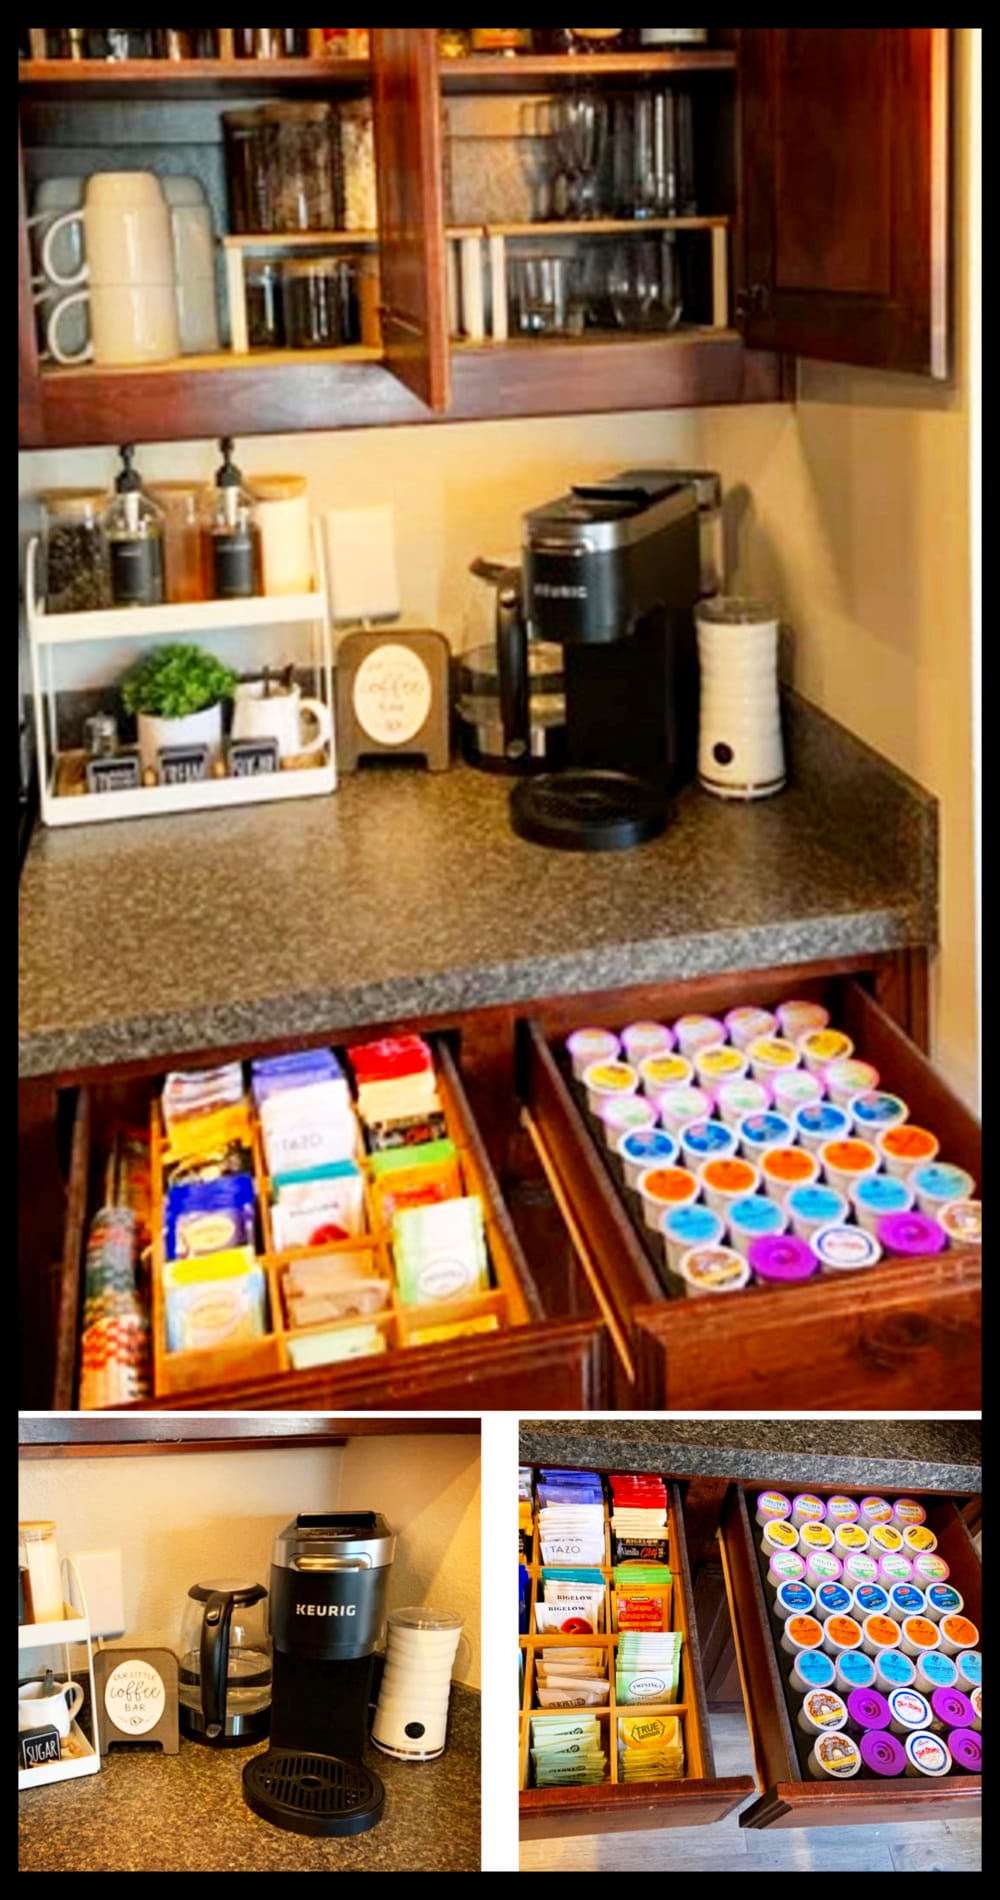 simple coffee bar set up on the counter using kitchen drawers underneath to organize and store K-cups, tea bags, hot cocoa packs etc - so organized and functional without taking up to much counter space in this small kitchen